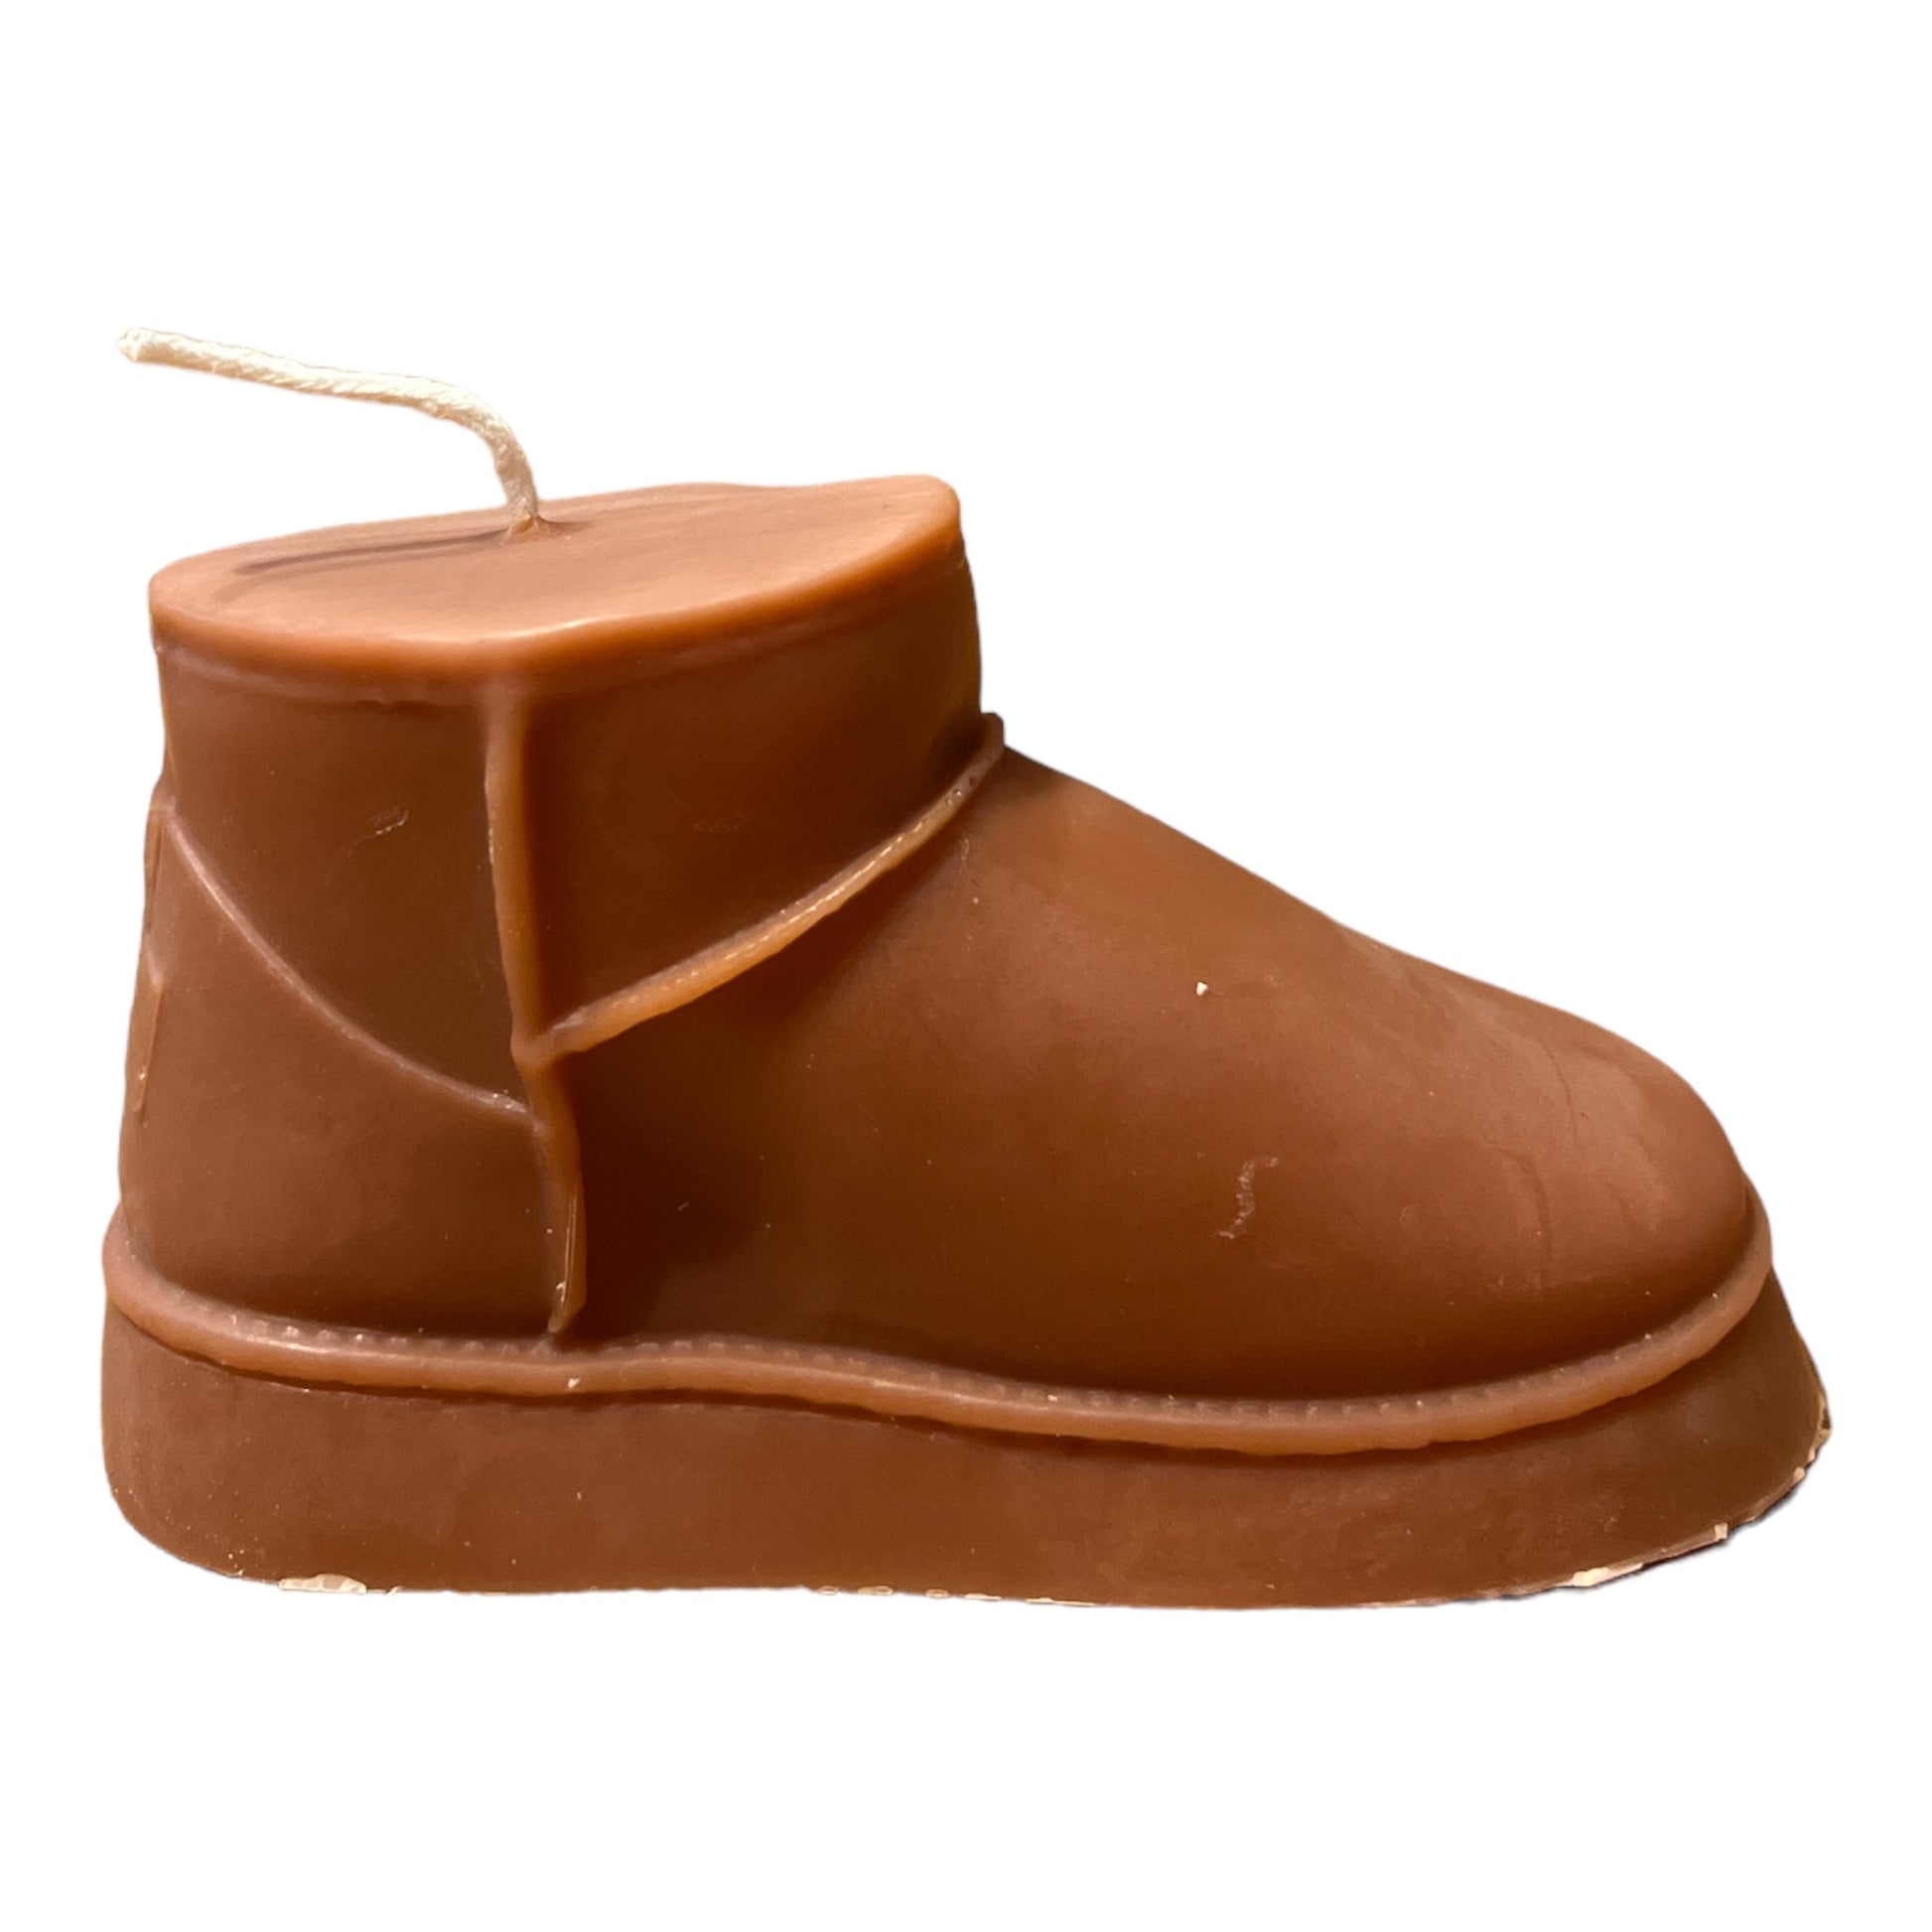 comfy boot: Nude tones / Unscented - Something about Sofia